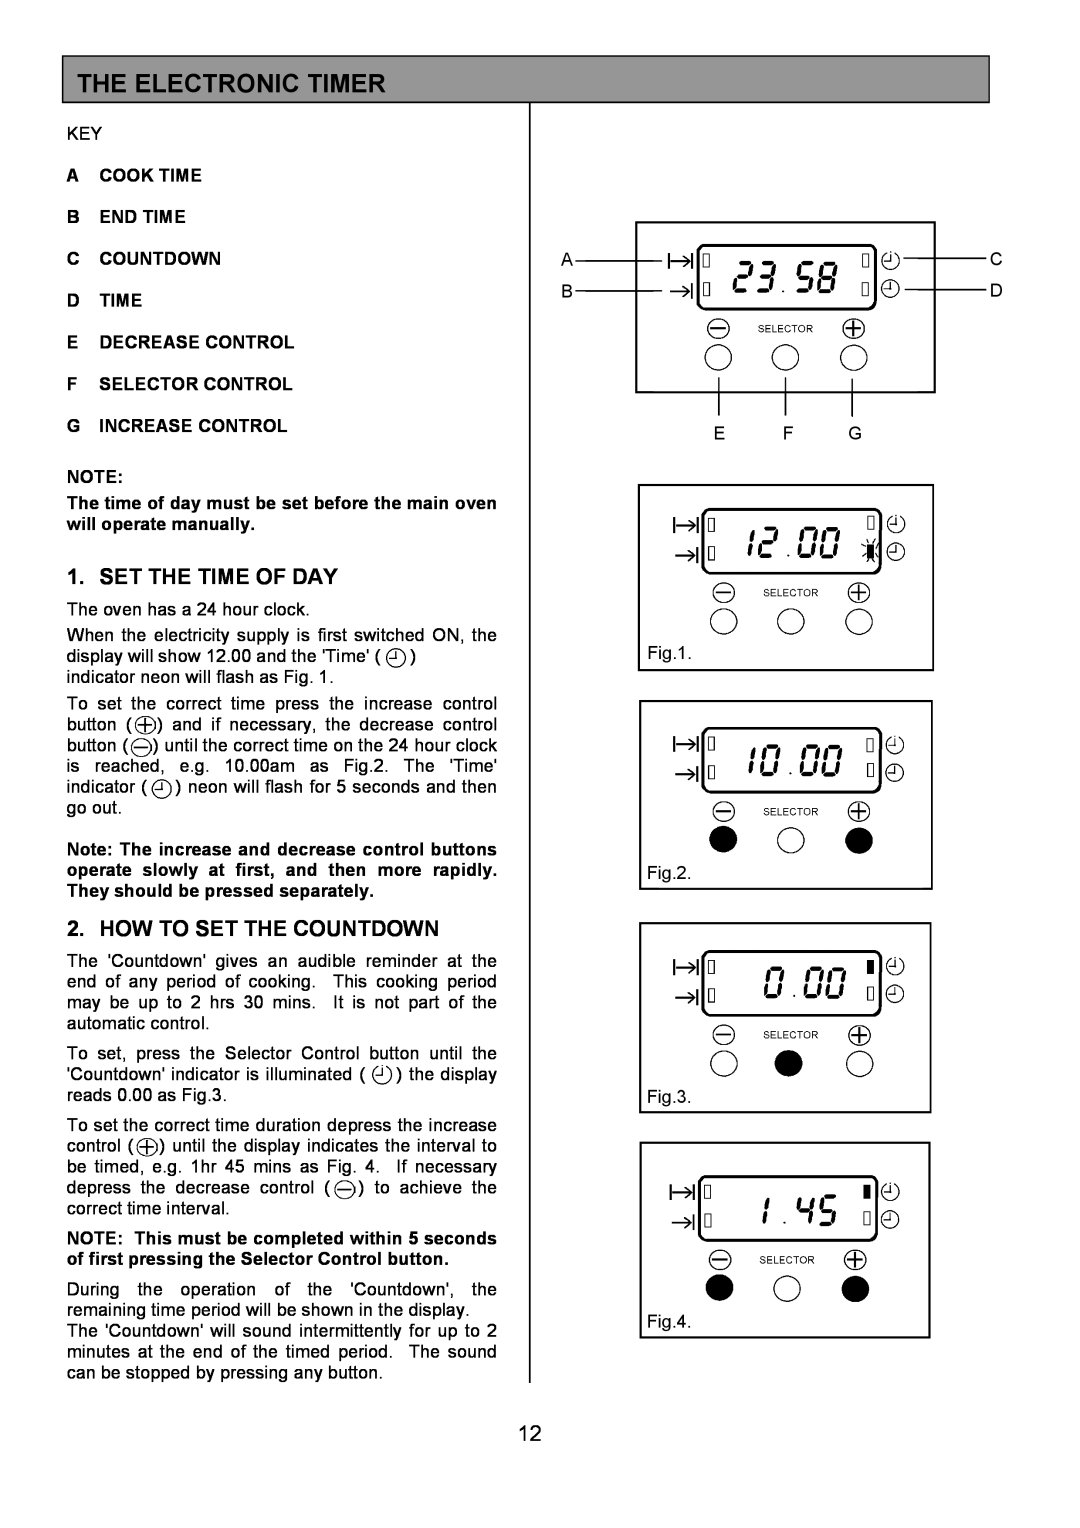 Tricity Bendix SIE556 installation instructions The Electronic Timer, Set The Time Of Day, How To Set The Countdown 